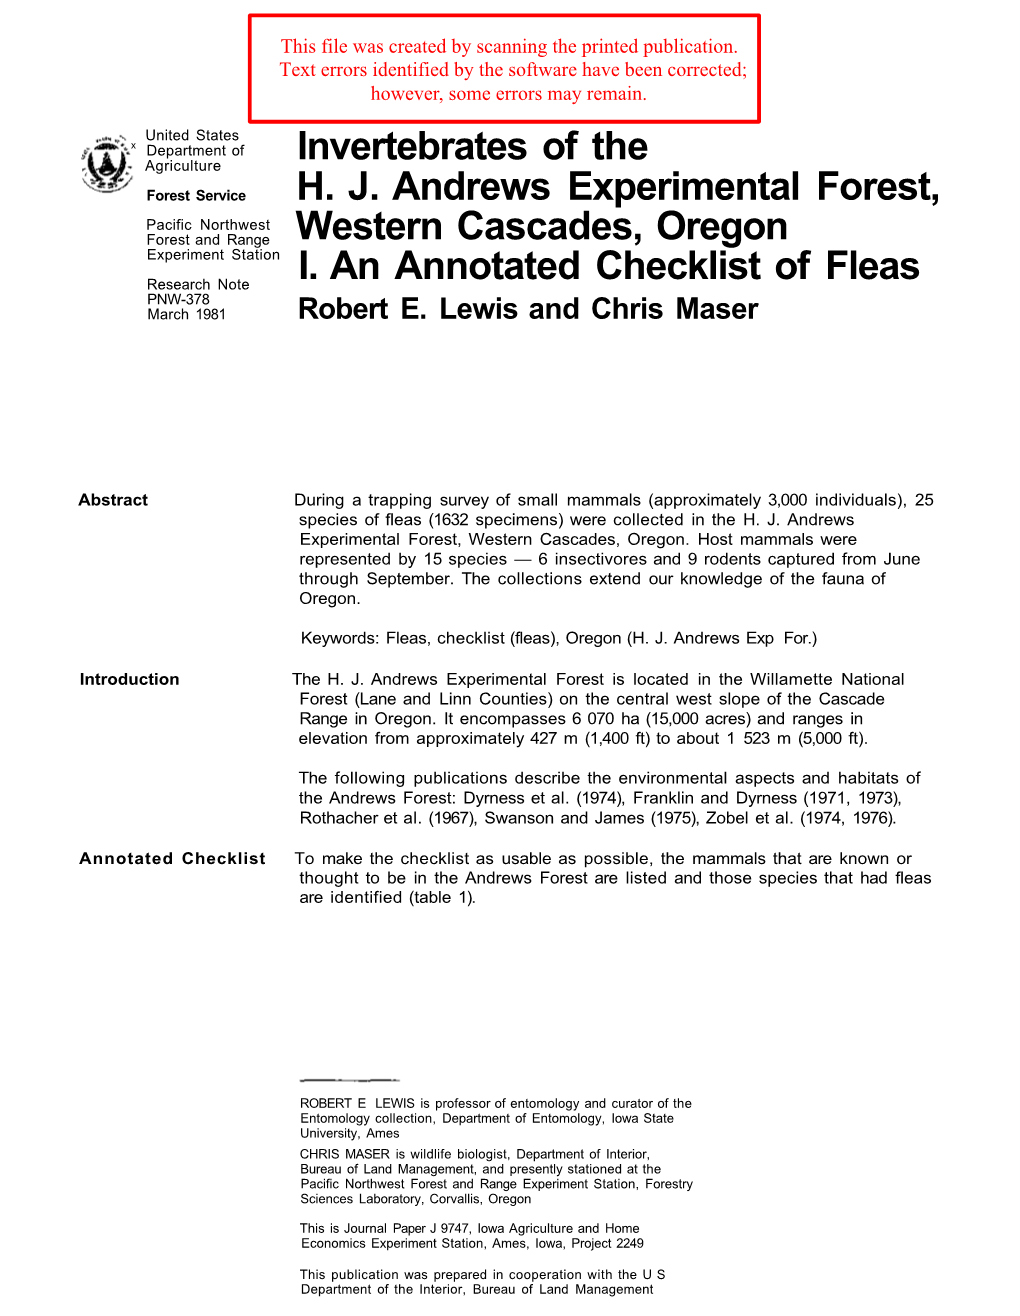 Invertebrates of the H. J. Andrews Experimental Forest, Western